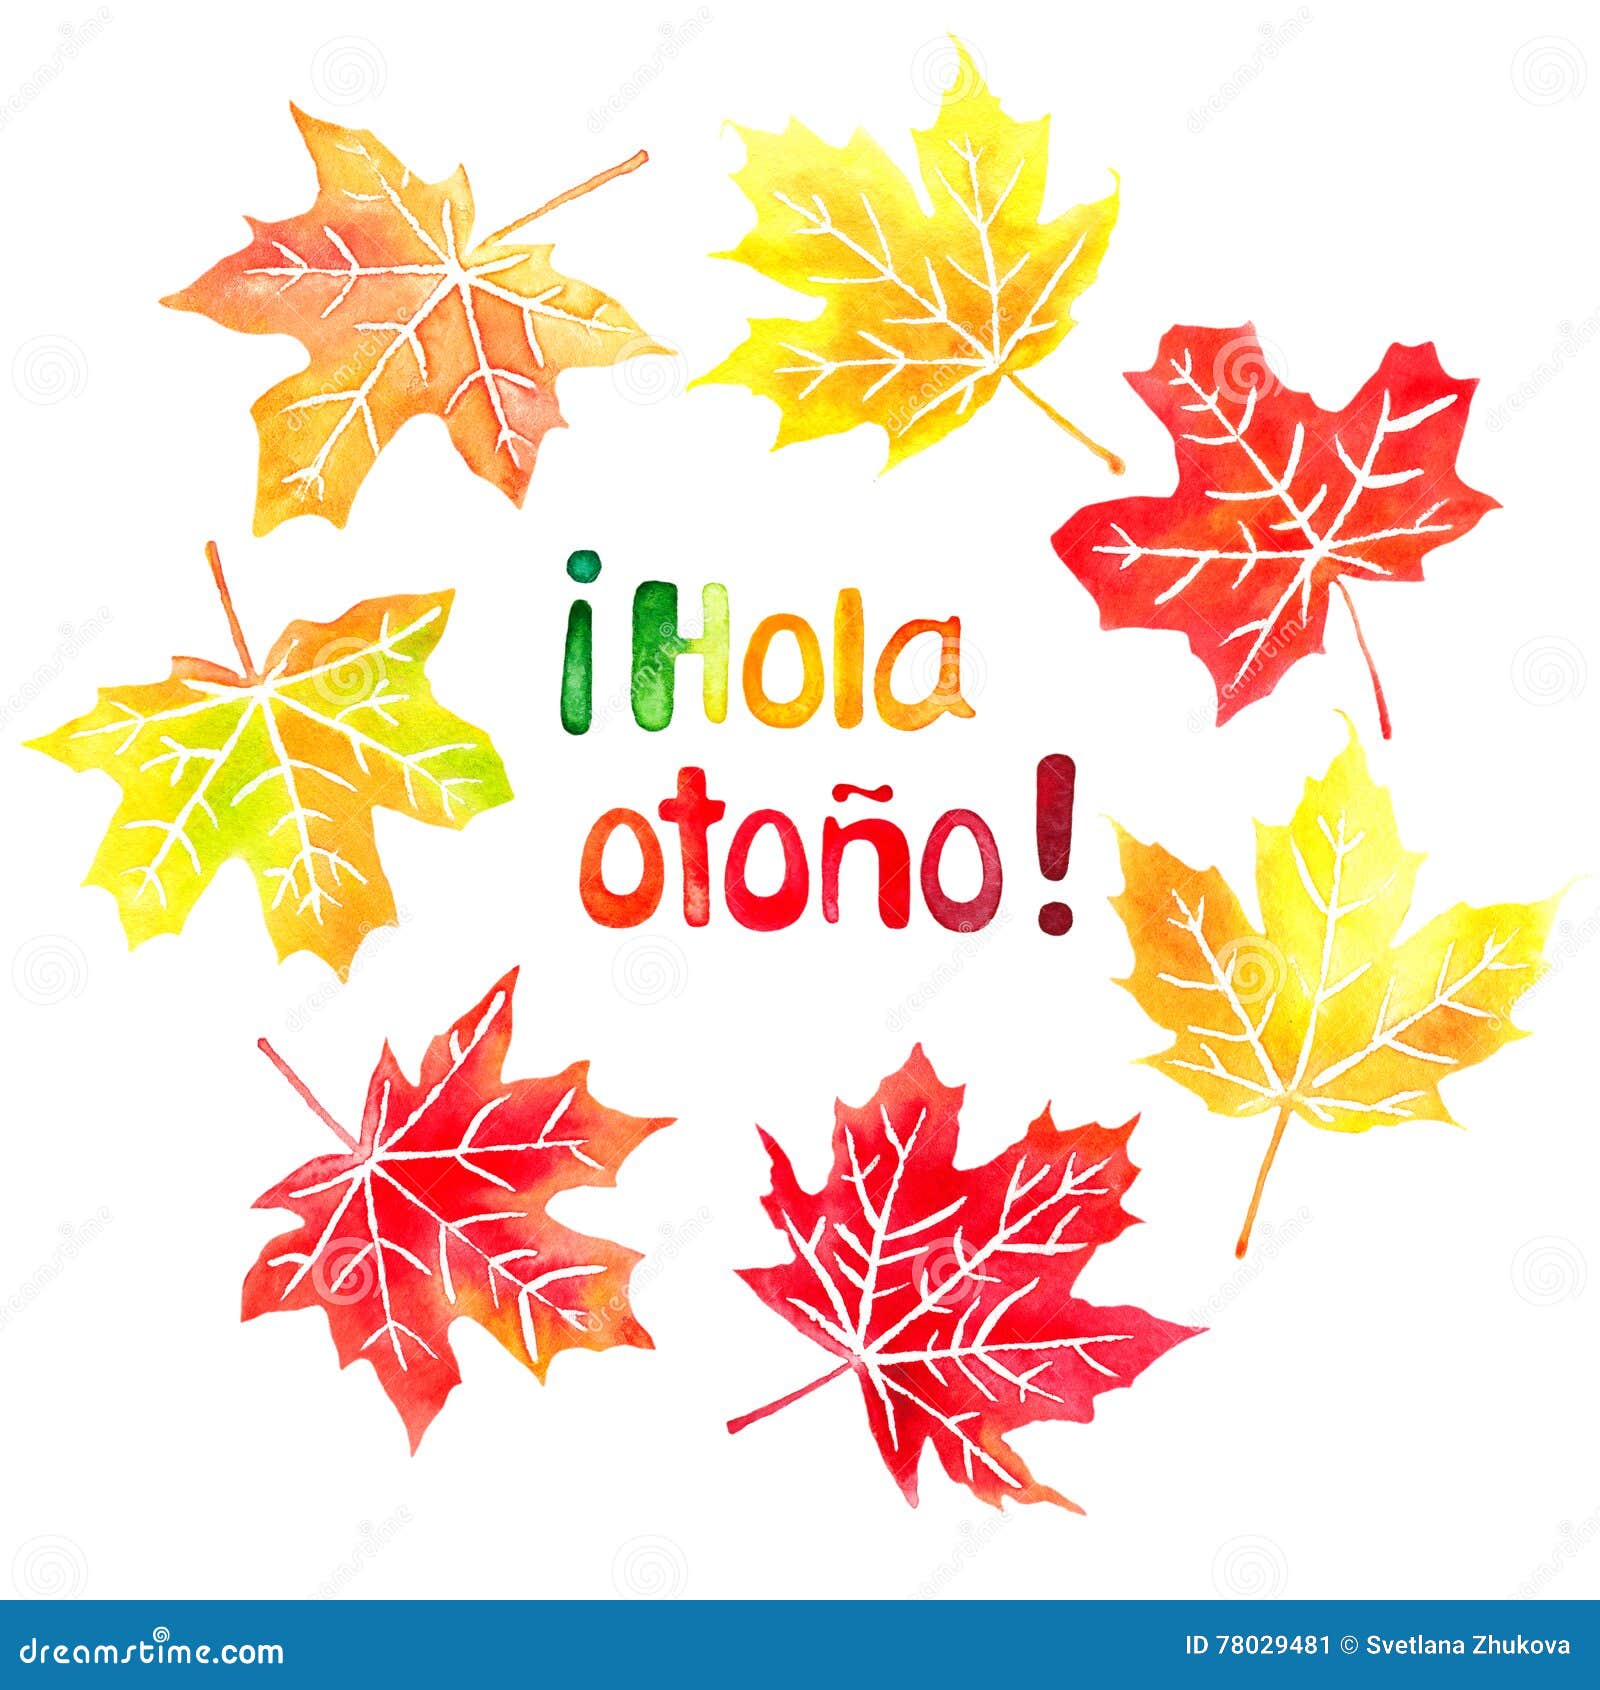 hola otono watercolor hand drawn lettering and maple leaves